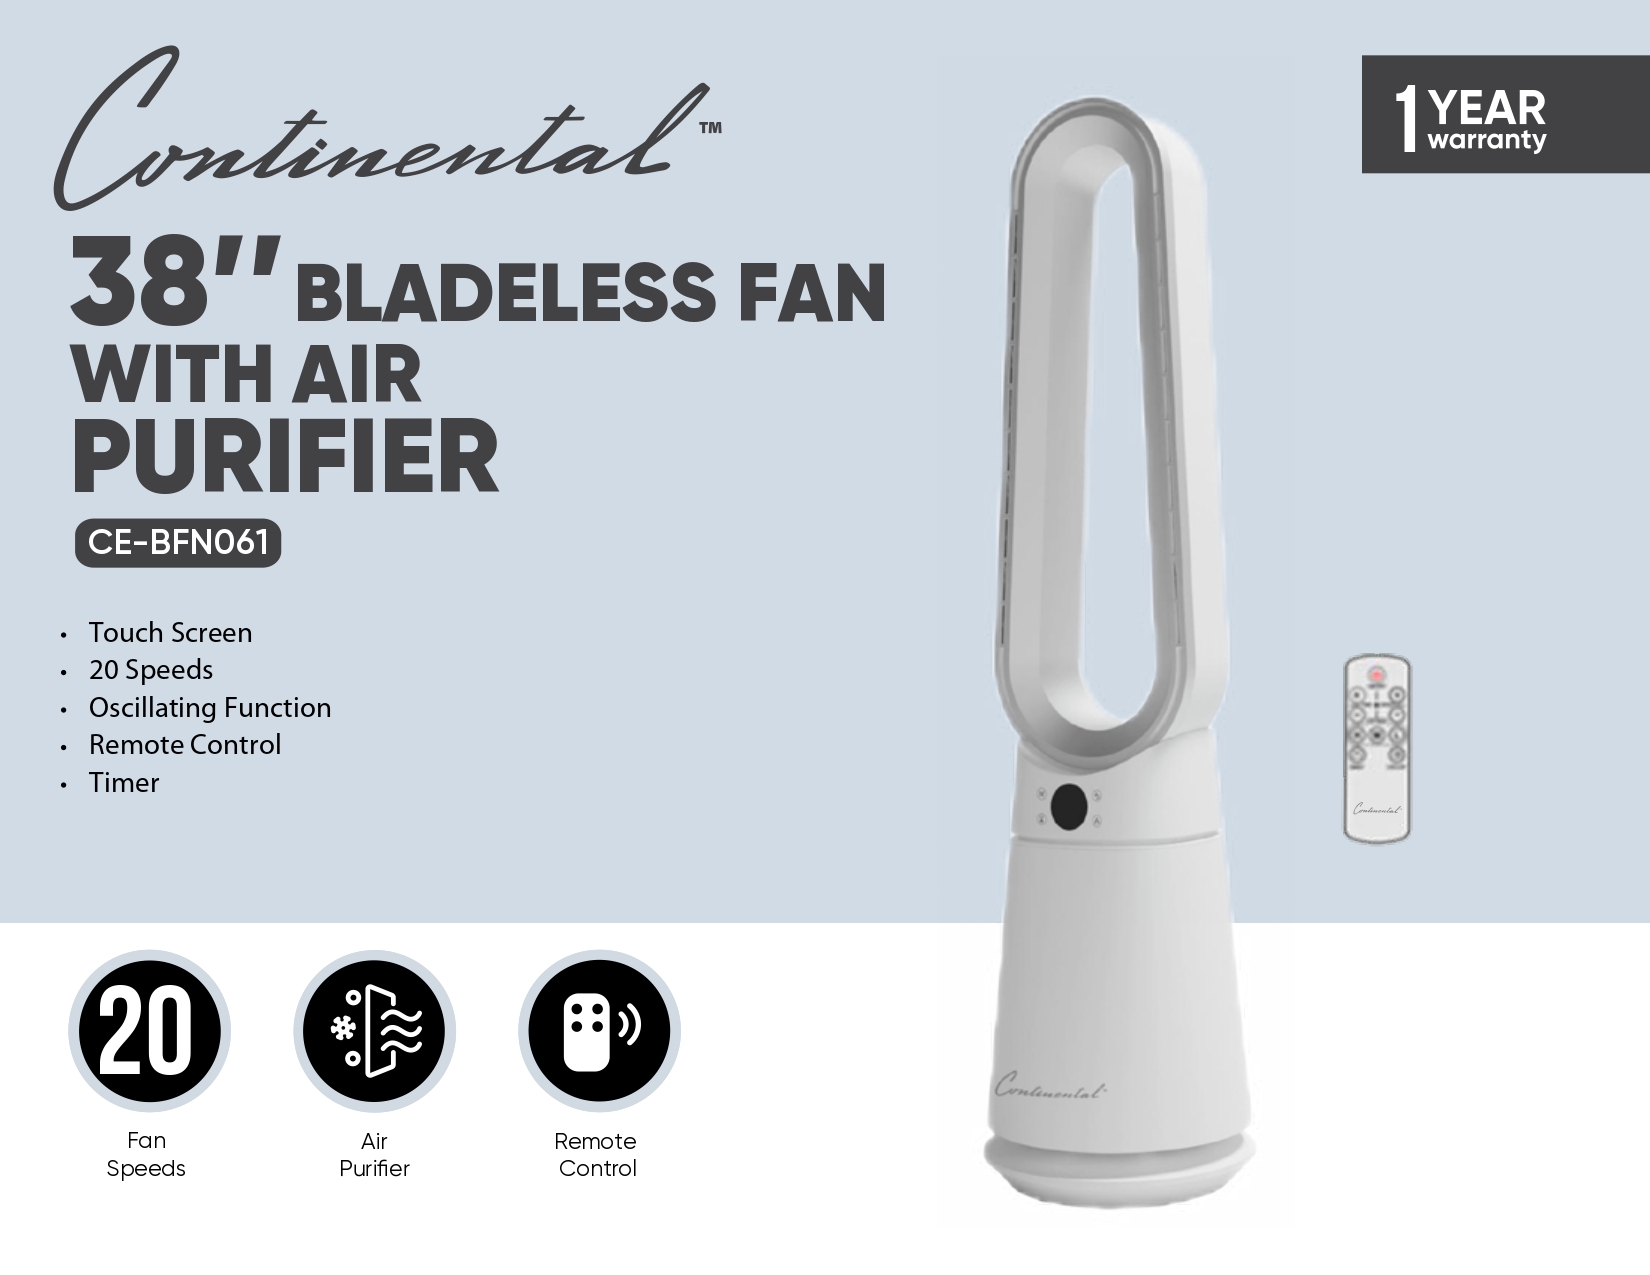 38’’BLADELESS FAN WITH AIR PURIFIER